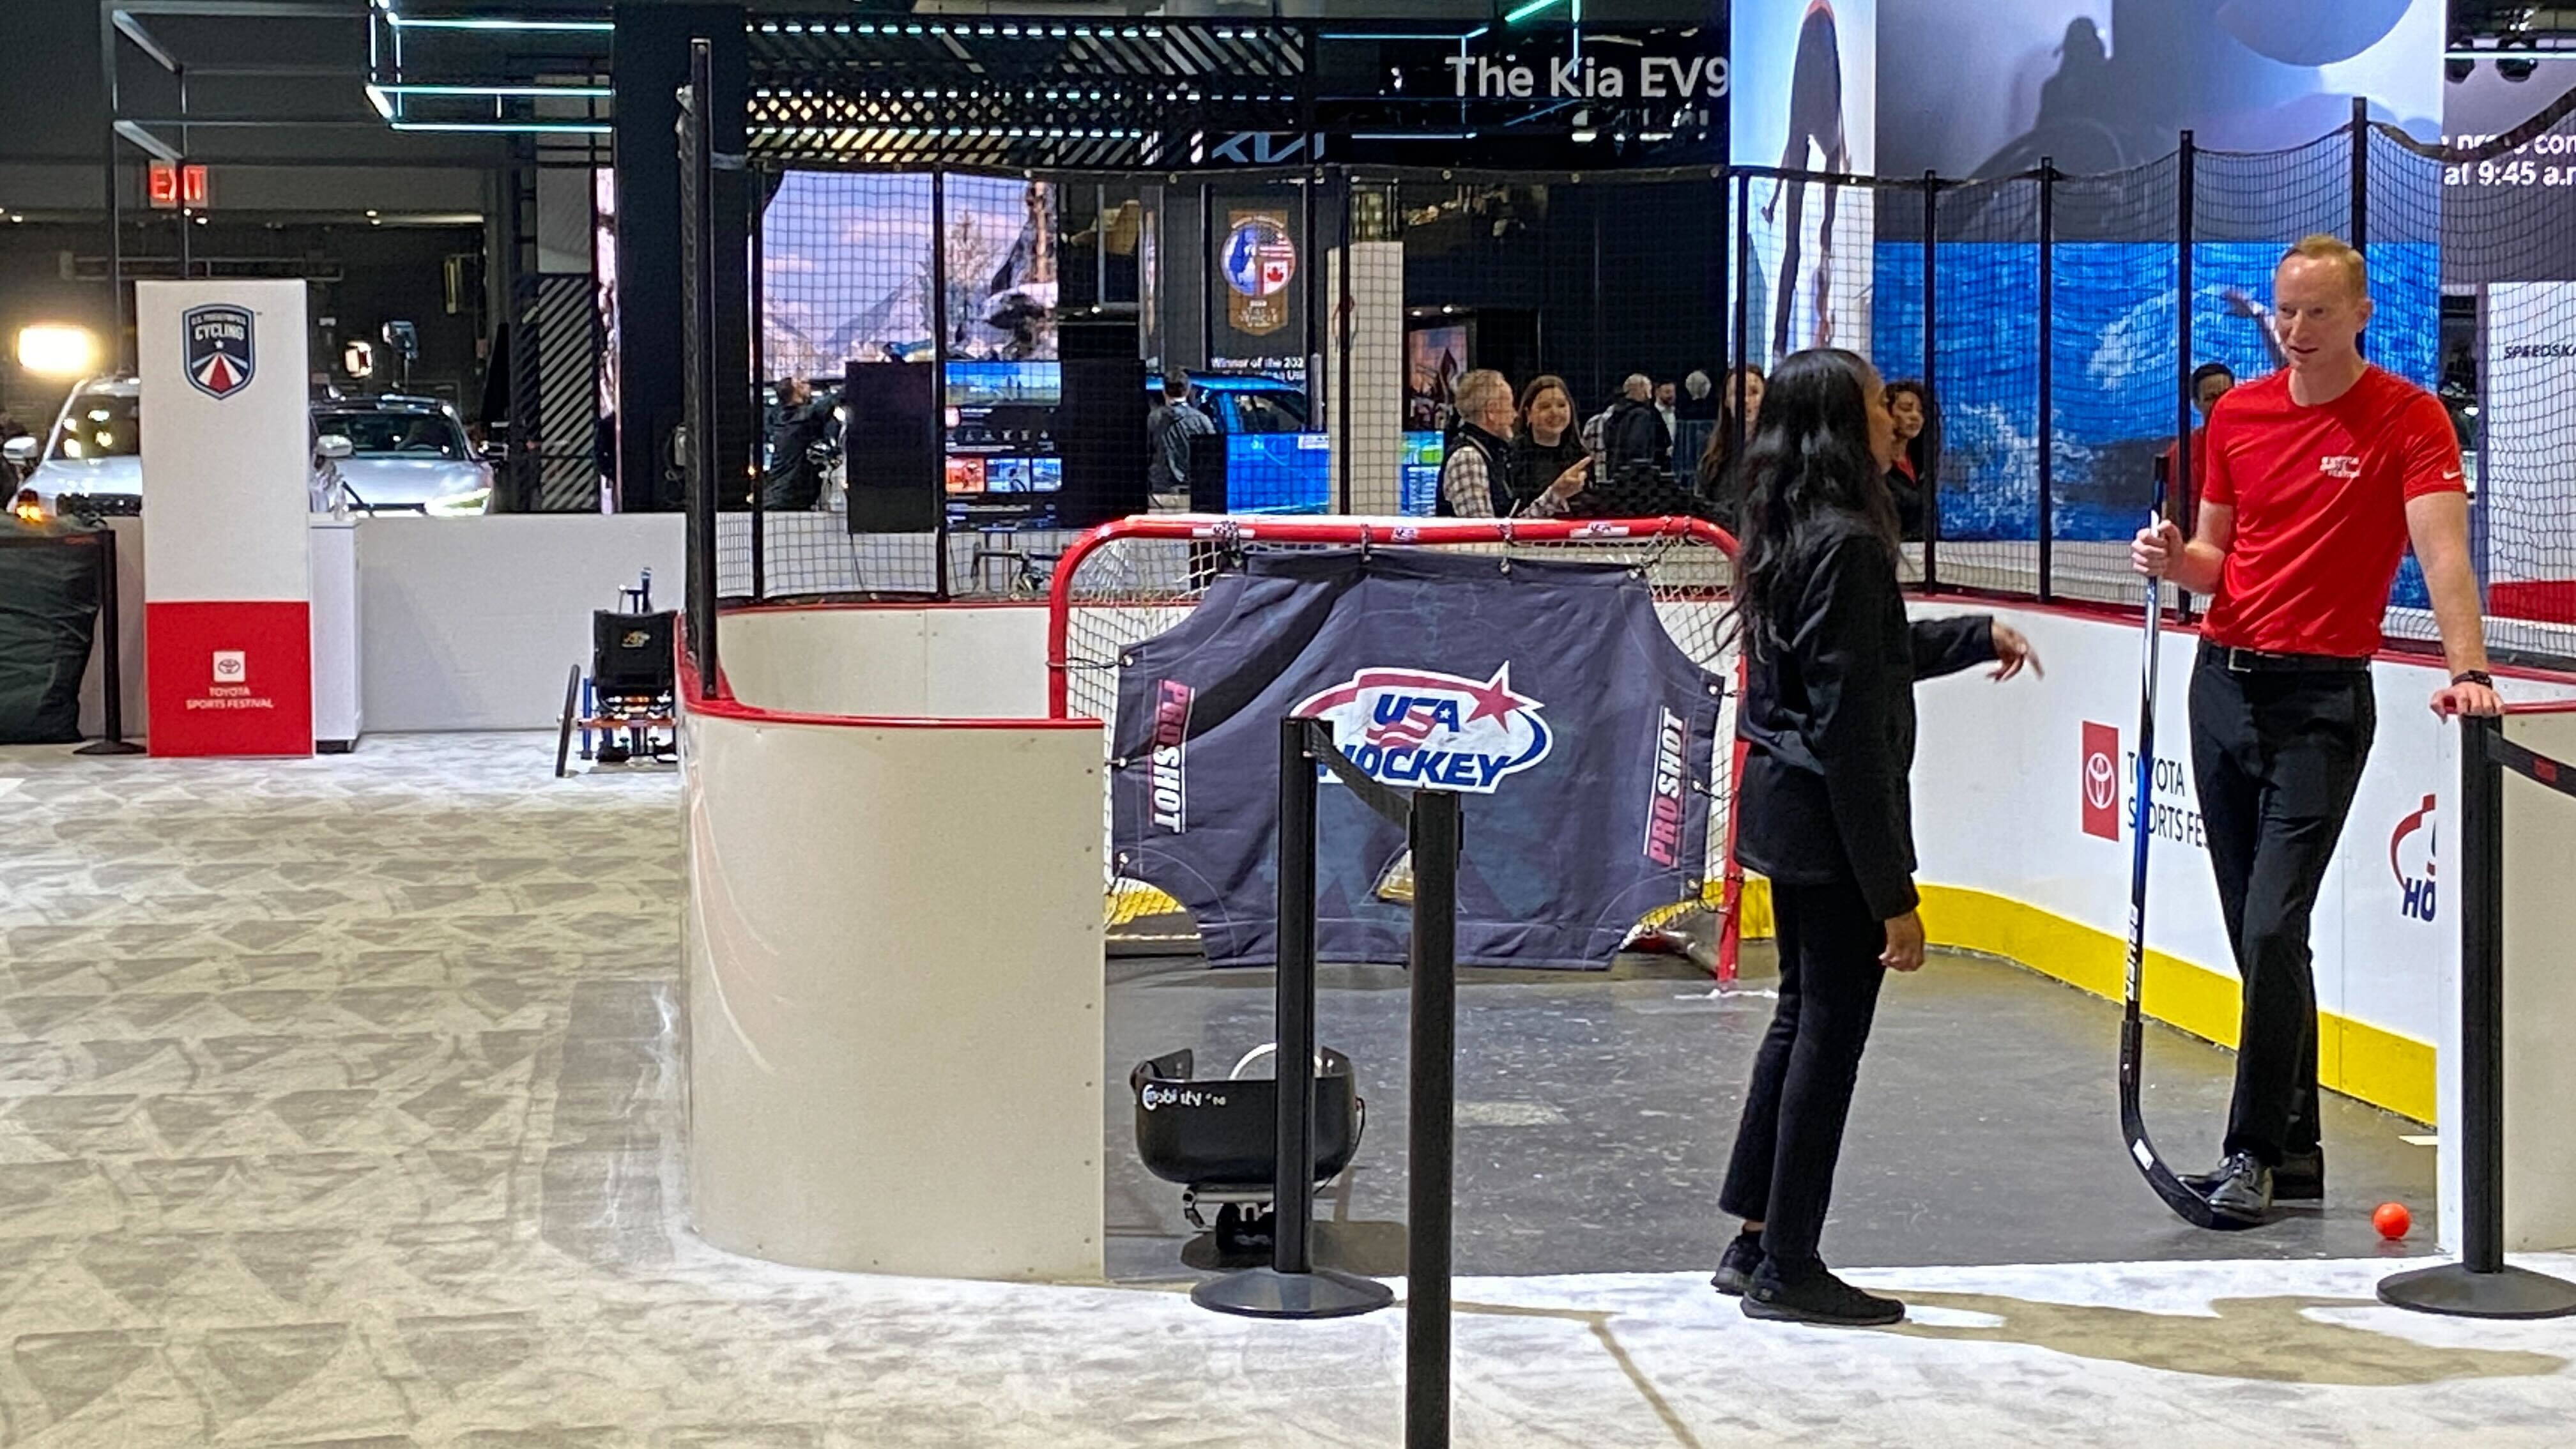 Toyota Sports Festival at the New York Auto Show